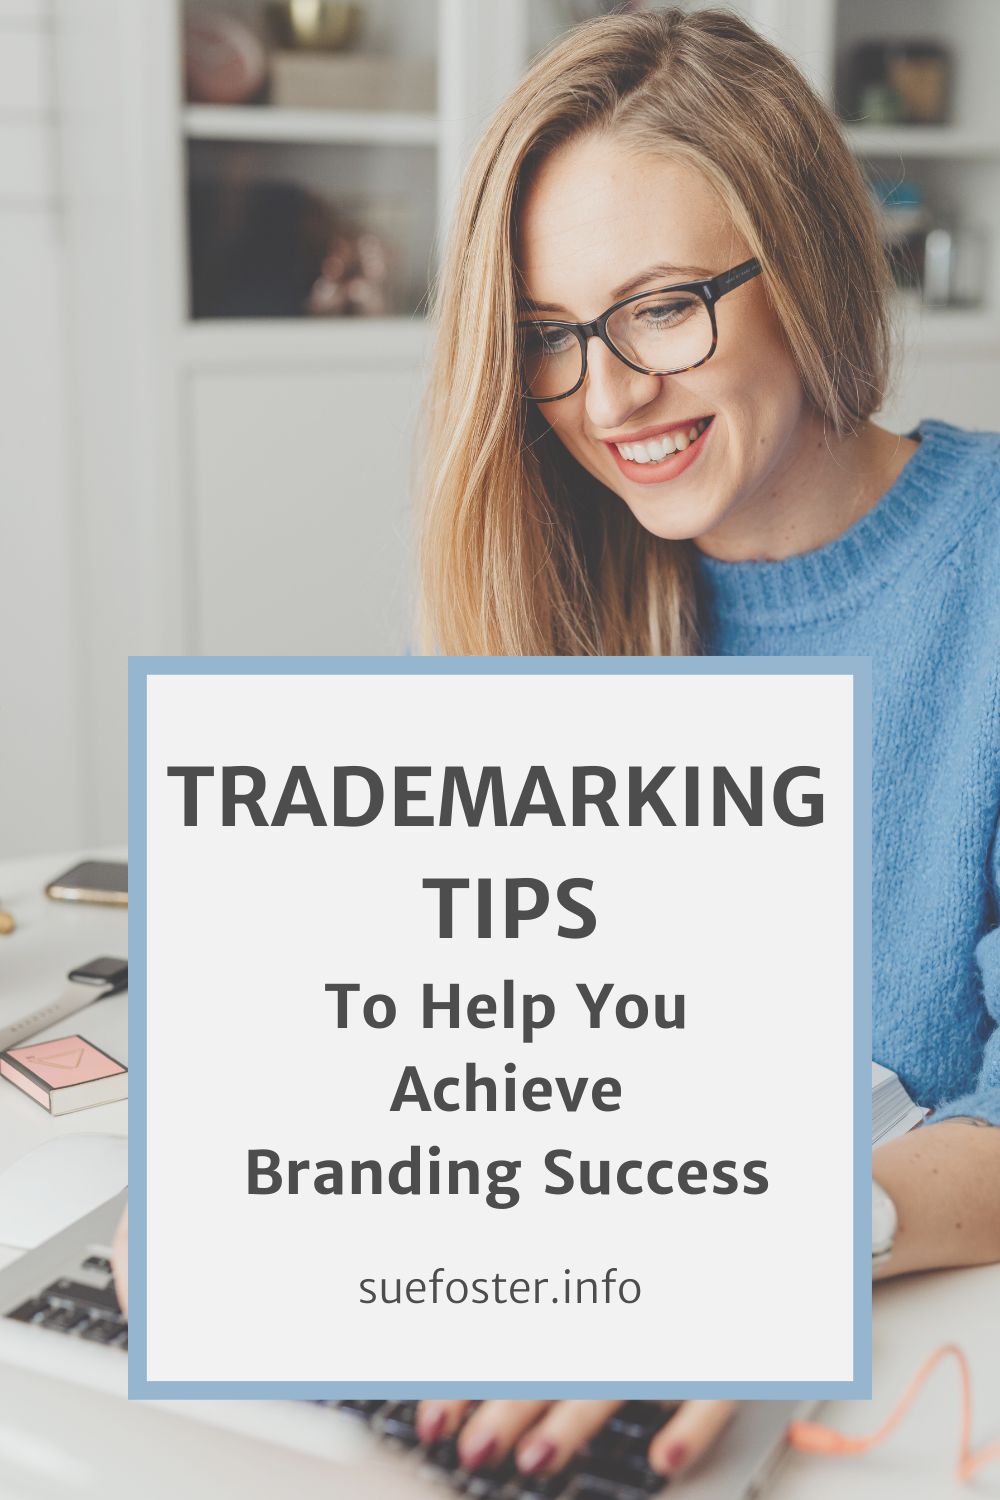 Essential trademarking tips for protecting your brand identity and business. Learn how to secure your trademark and avoid infringement risks